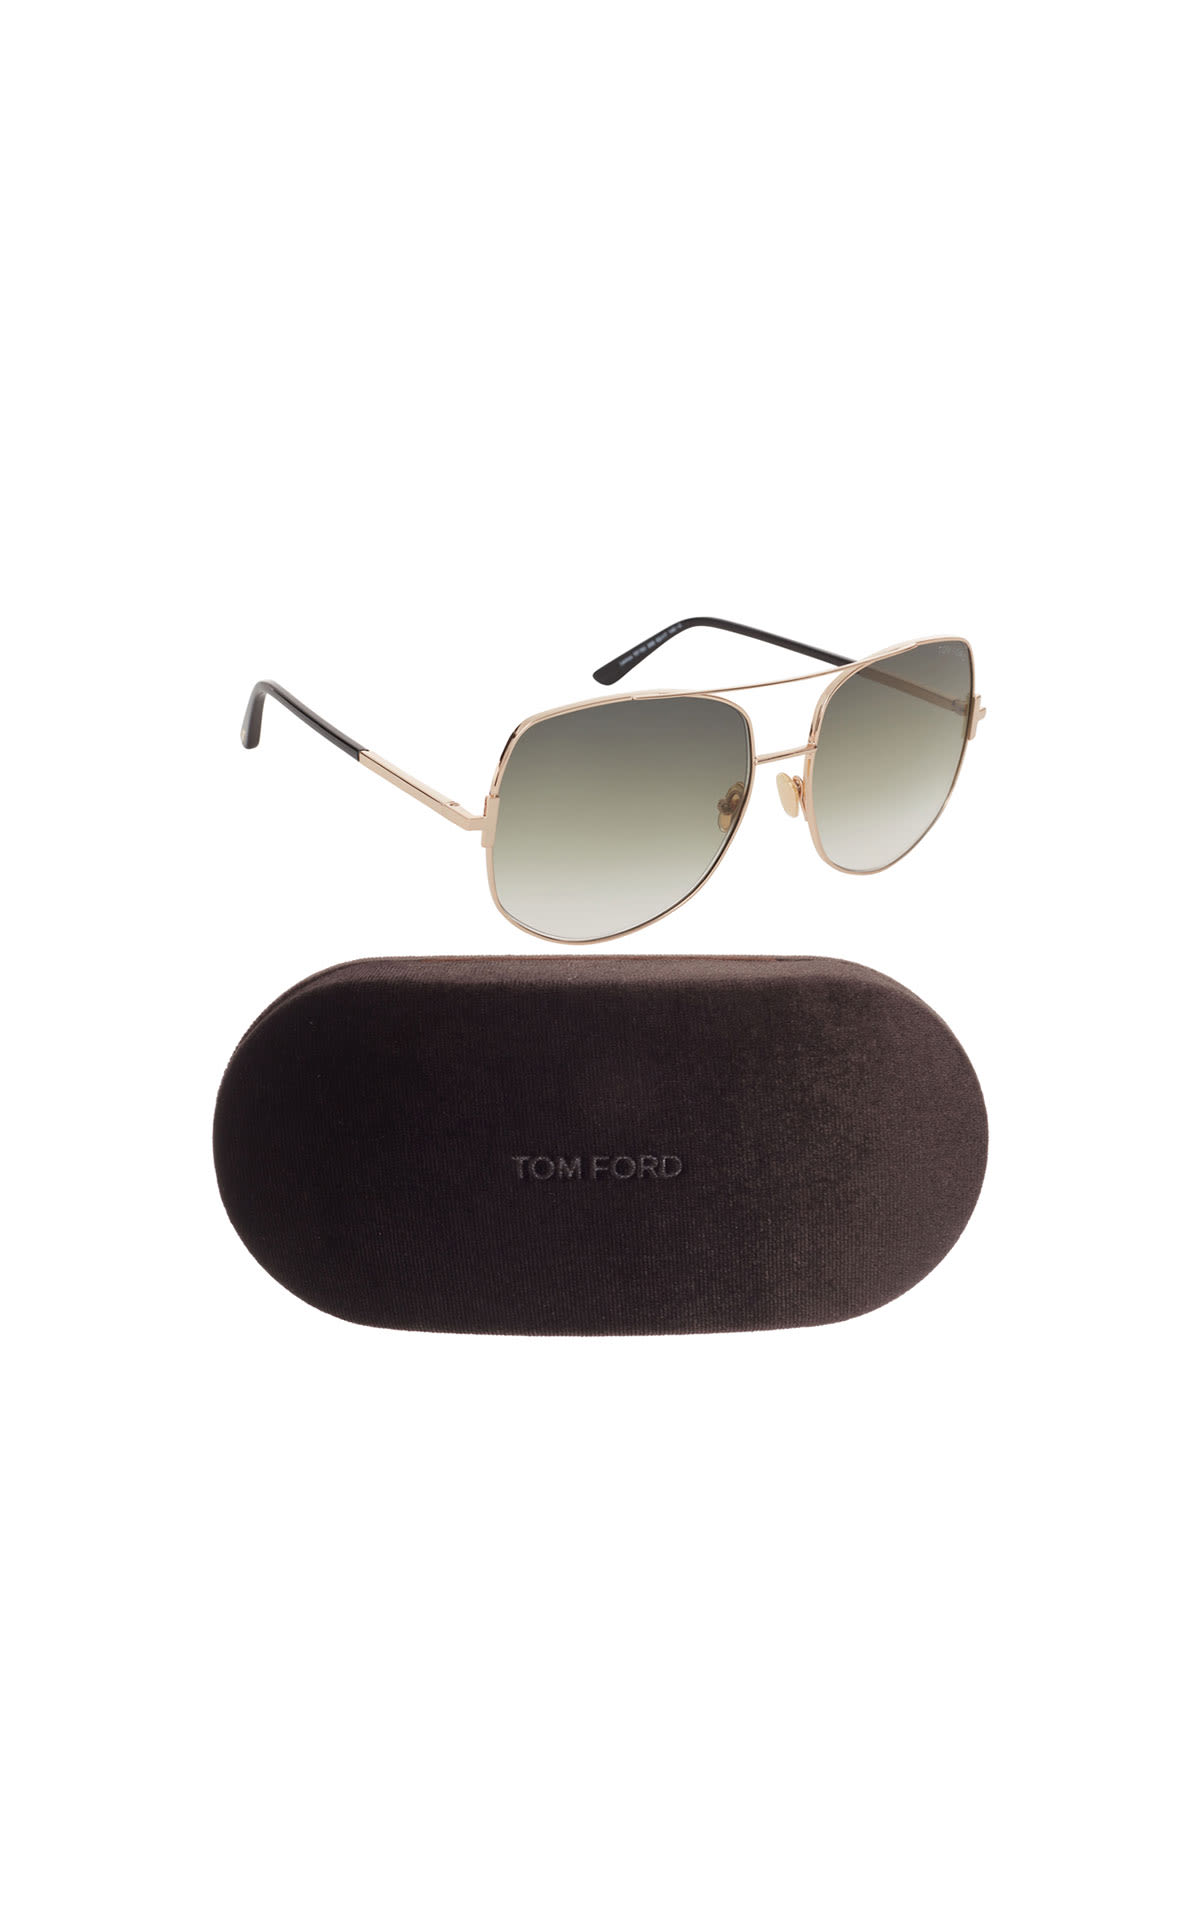 David Clulow Tom Ford FT0783 sunglasses from Bicester Village